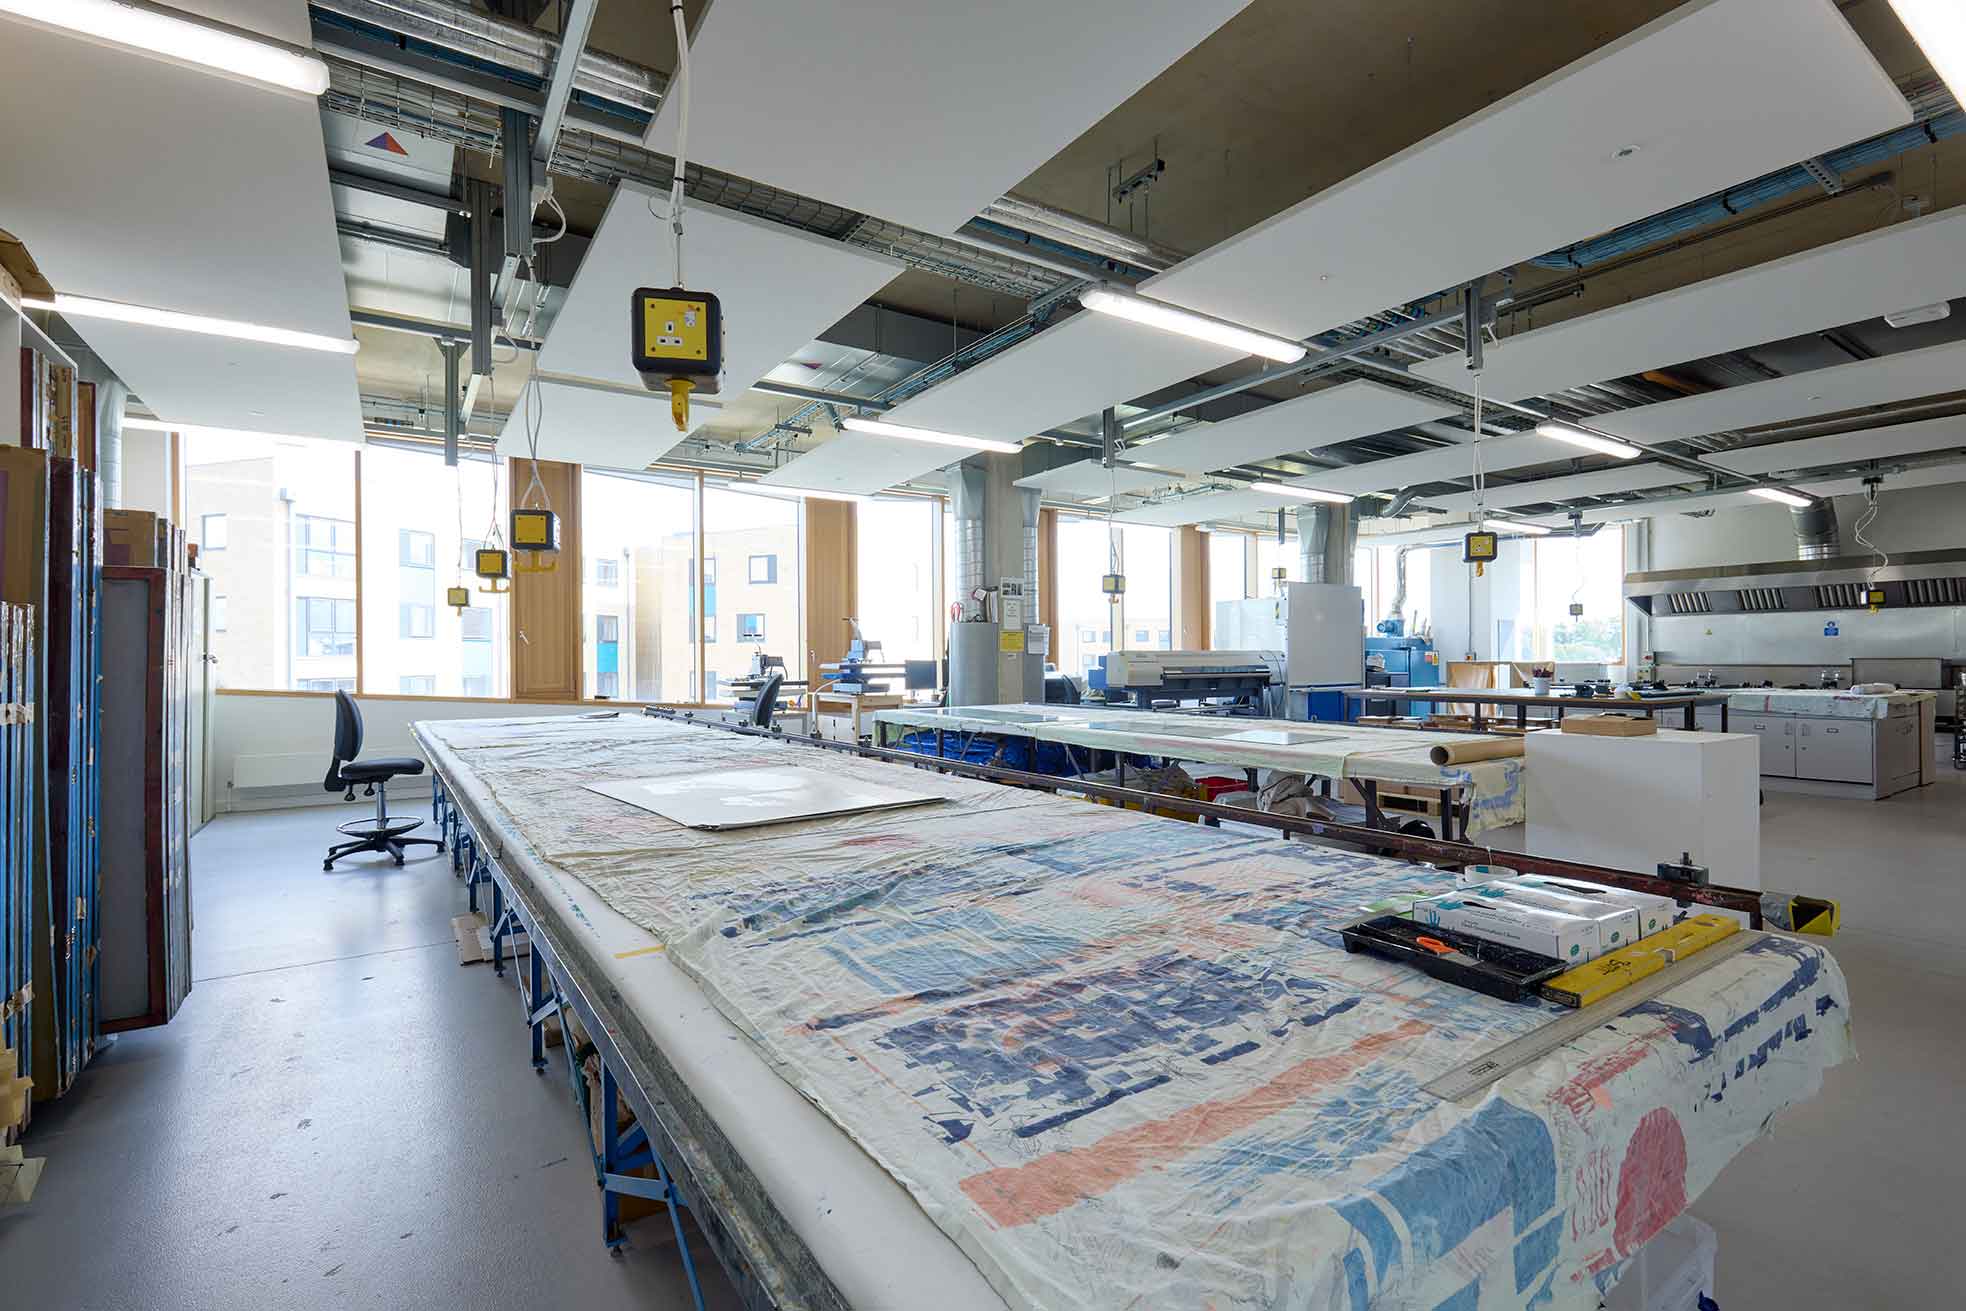 The photograph shows the textile printing workshop at the University of Northampton. In the foreground textile prints are laid out on workbenches in the background are floor-to-ceiling windows and printmaking equipment